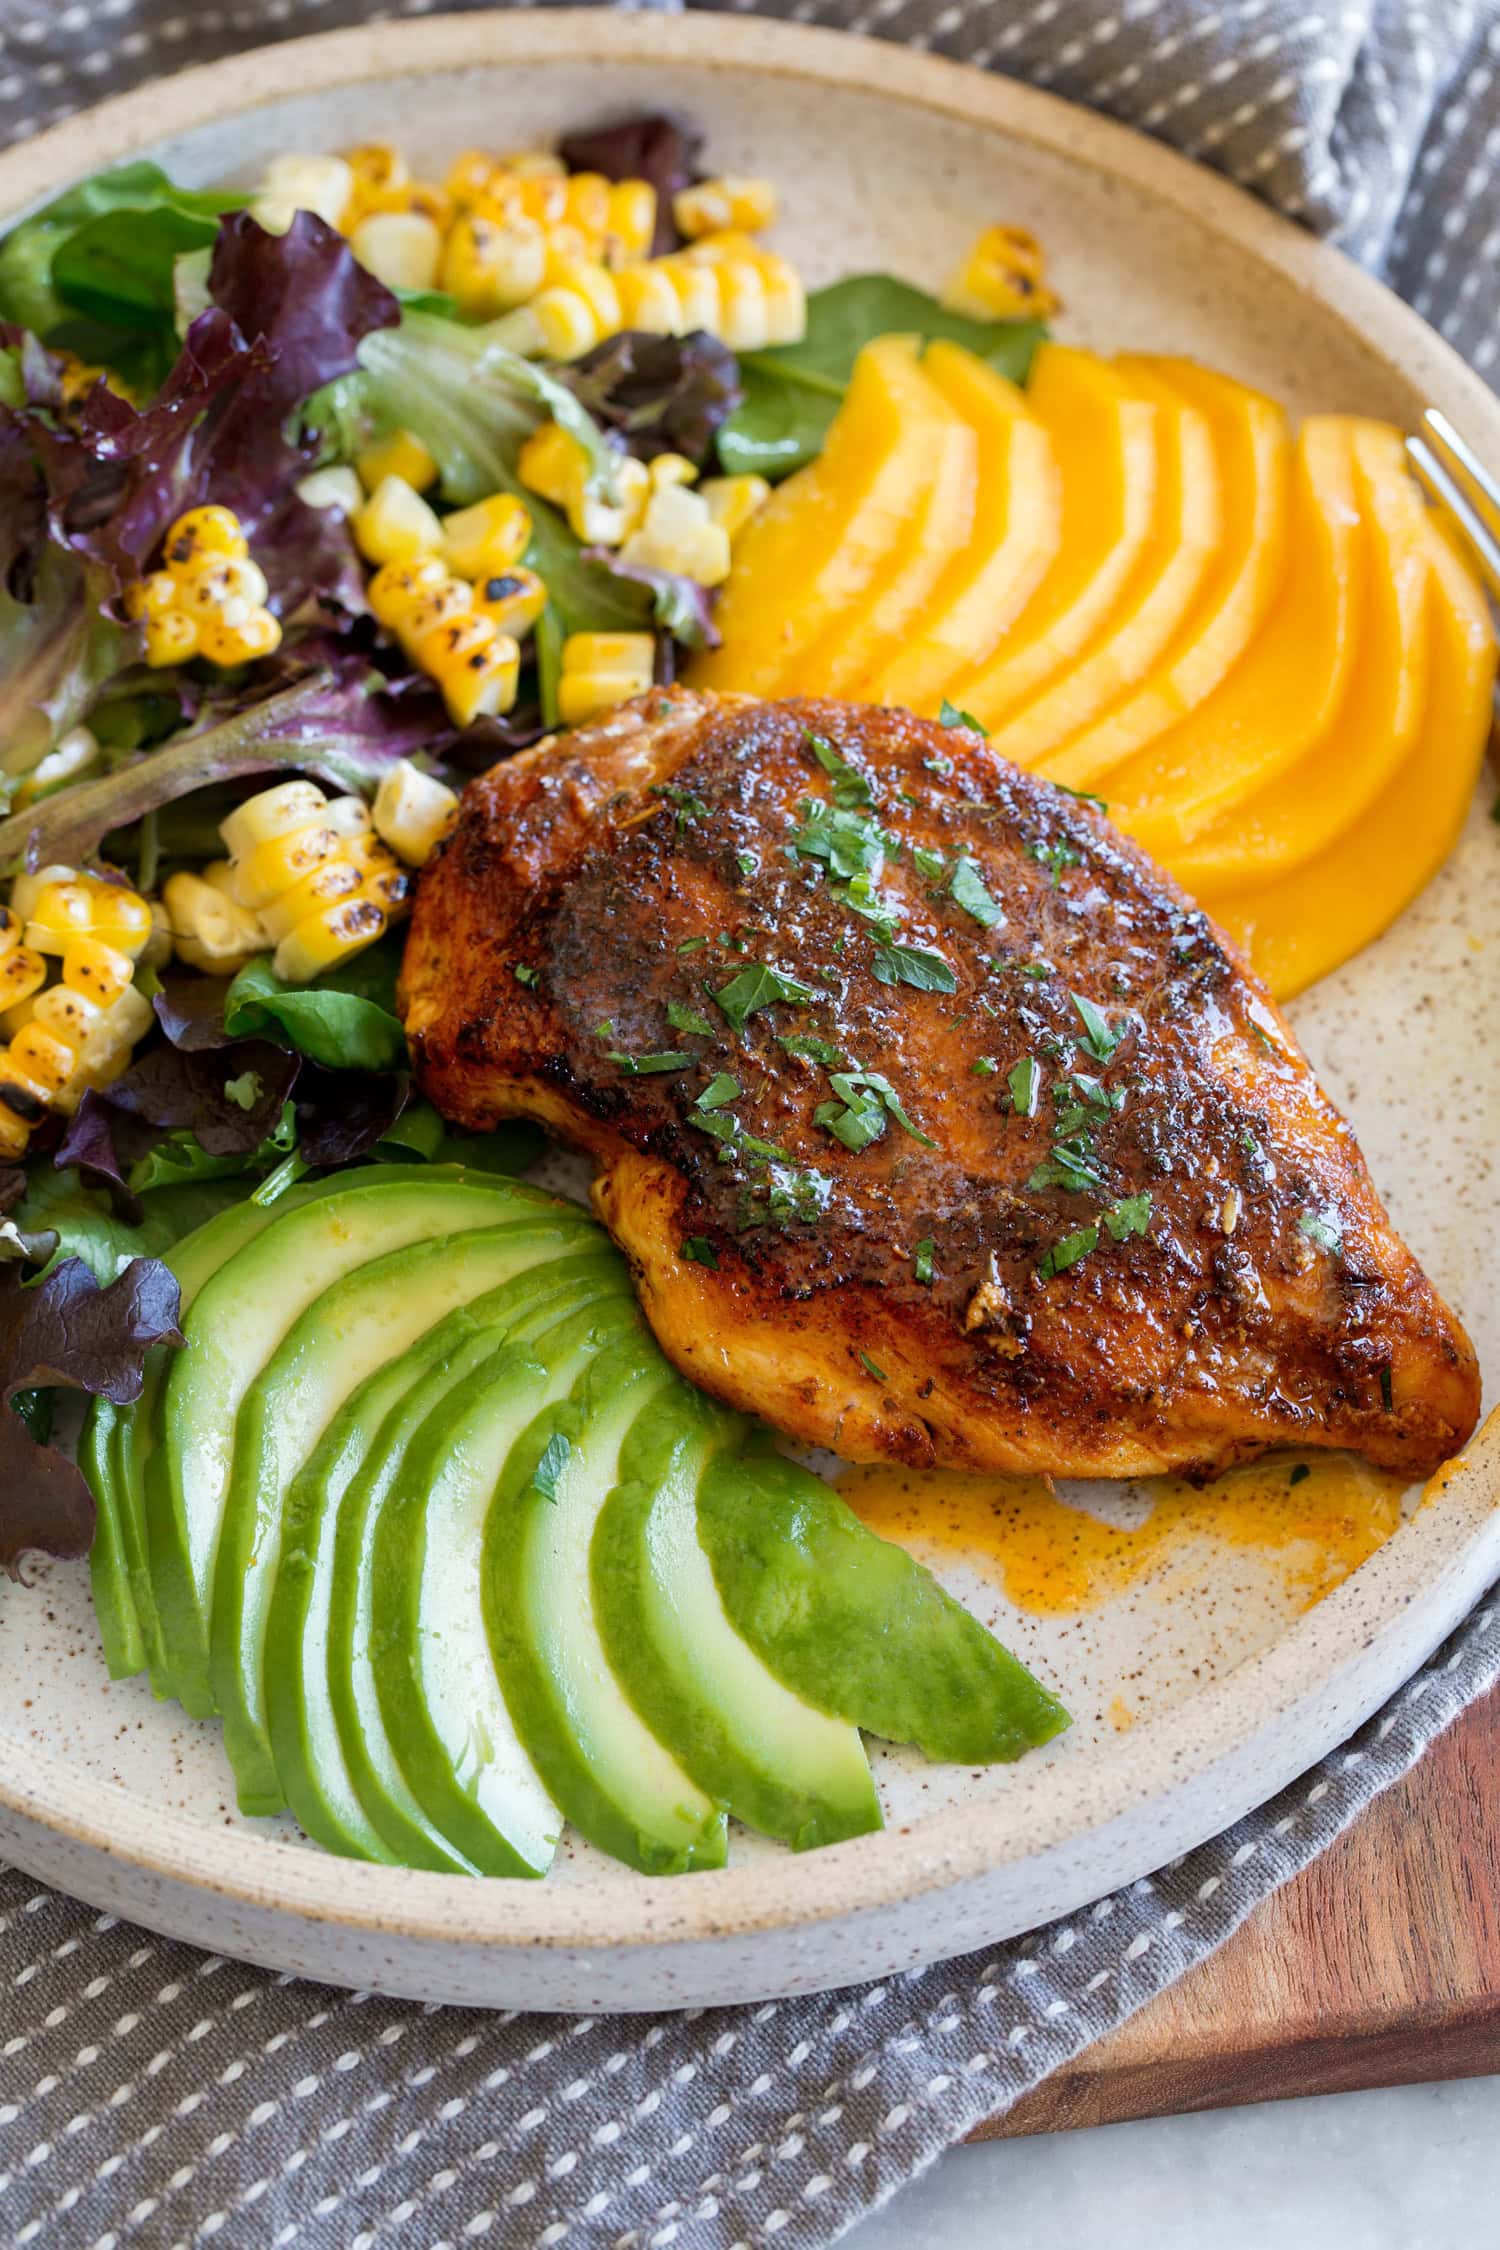 Blackened chicken breasts with serving suggestion of corn salad, mango and avocado.